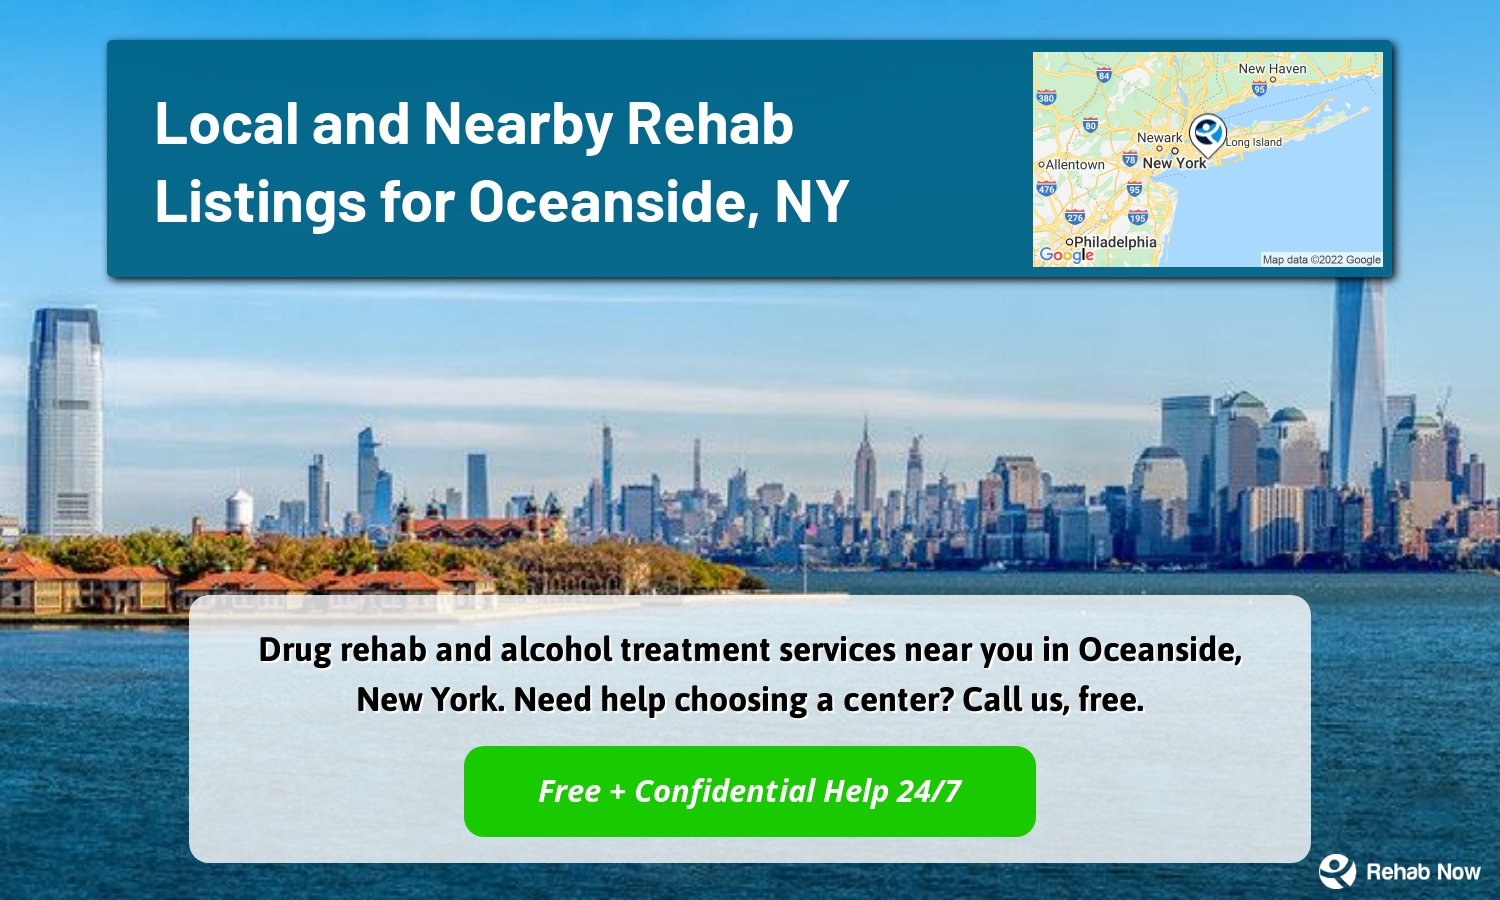 Drug rehab and alcohol treatment services near you in Oceanside, New York. Need help choosing a center? Call us, free.